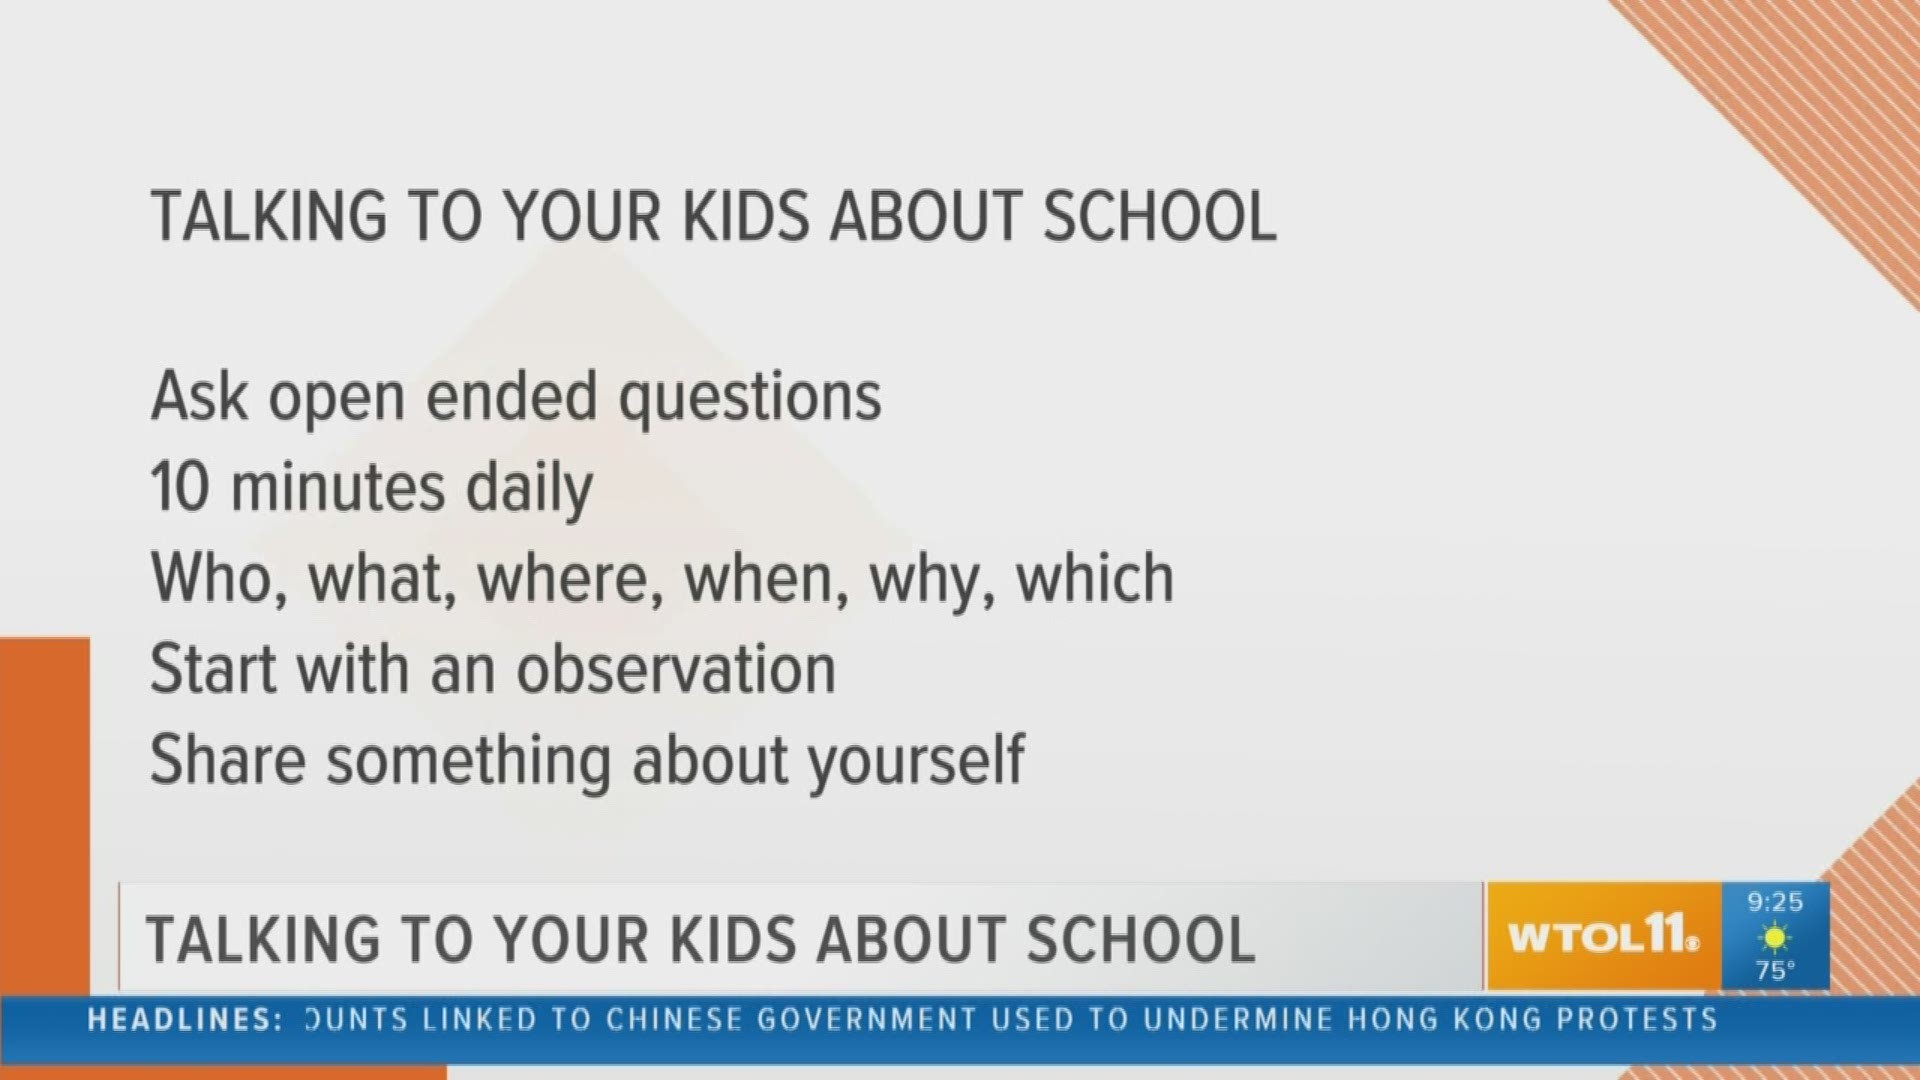 Dr. Victoria Kelly offers some tips on how to talk to your kids about school.